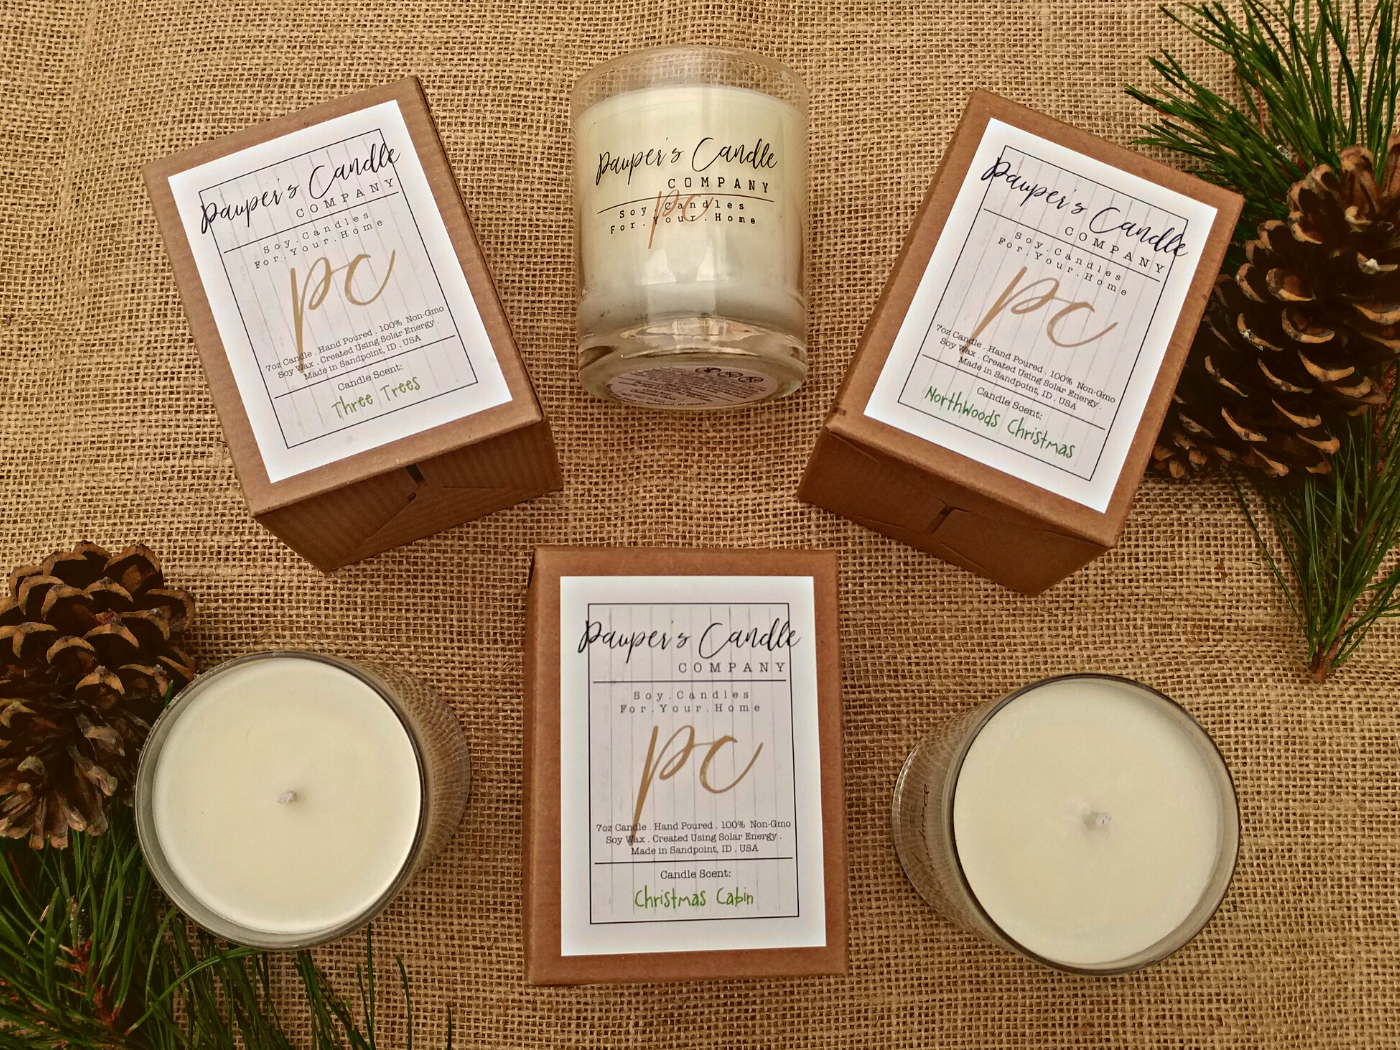 Pauper's Candle Company